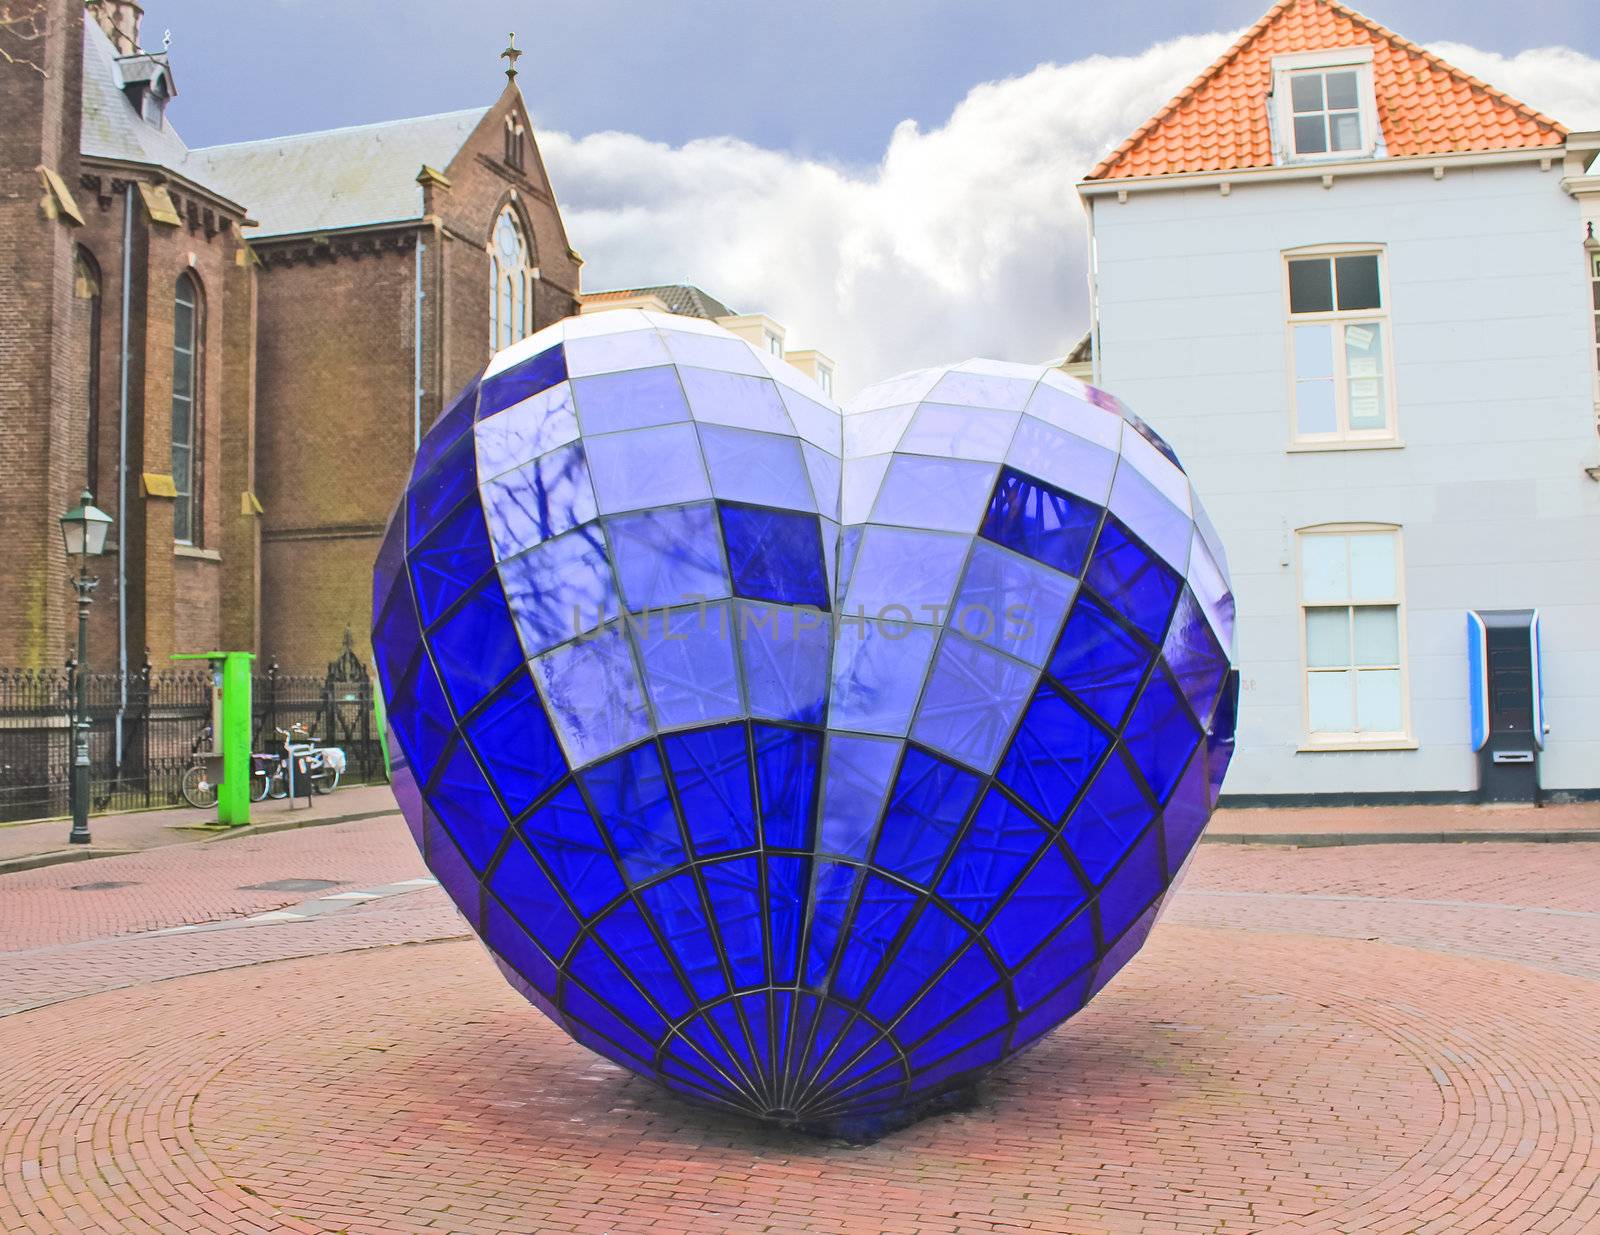 Abstract sculpture in the town square. Delft,  Netherlands by NickNick